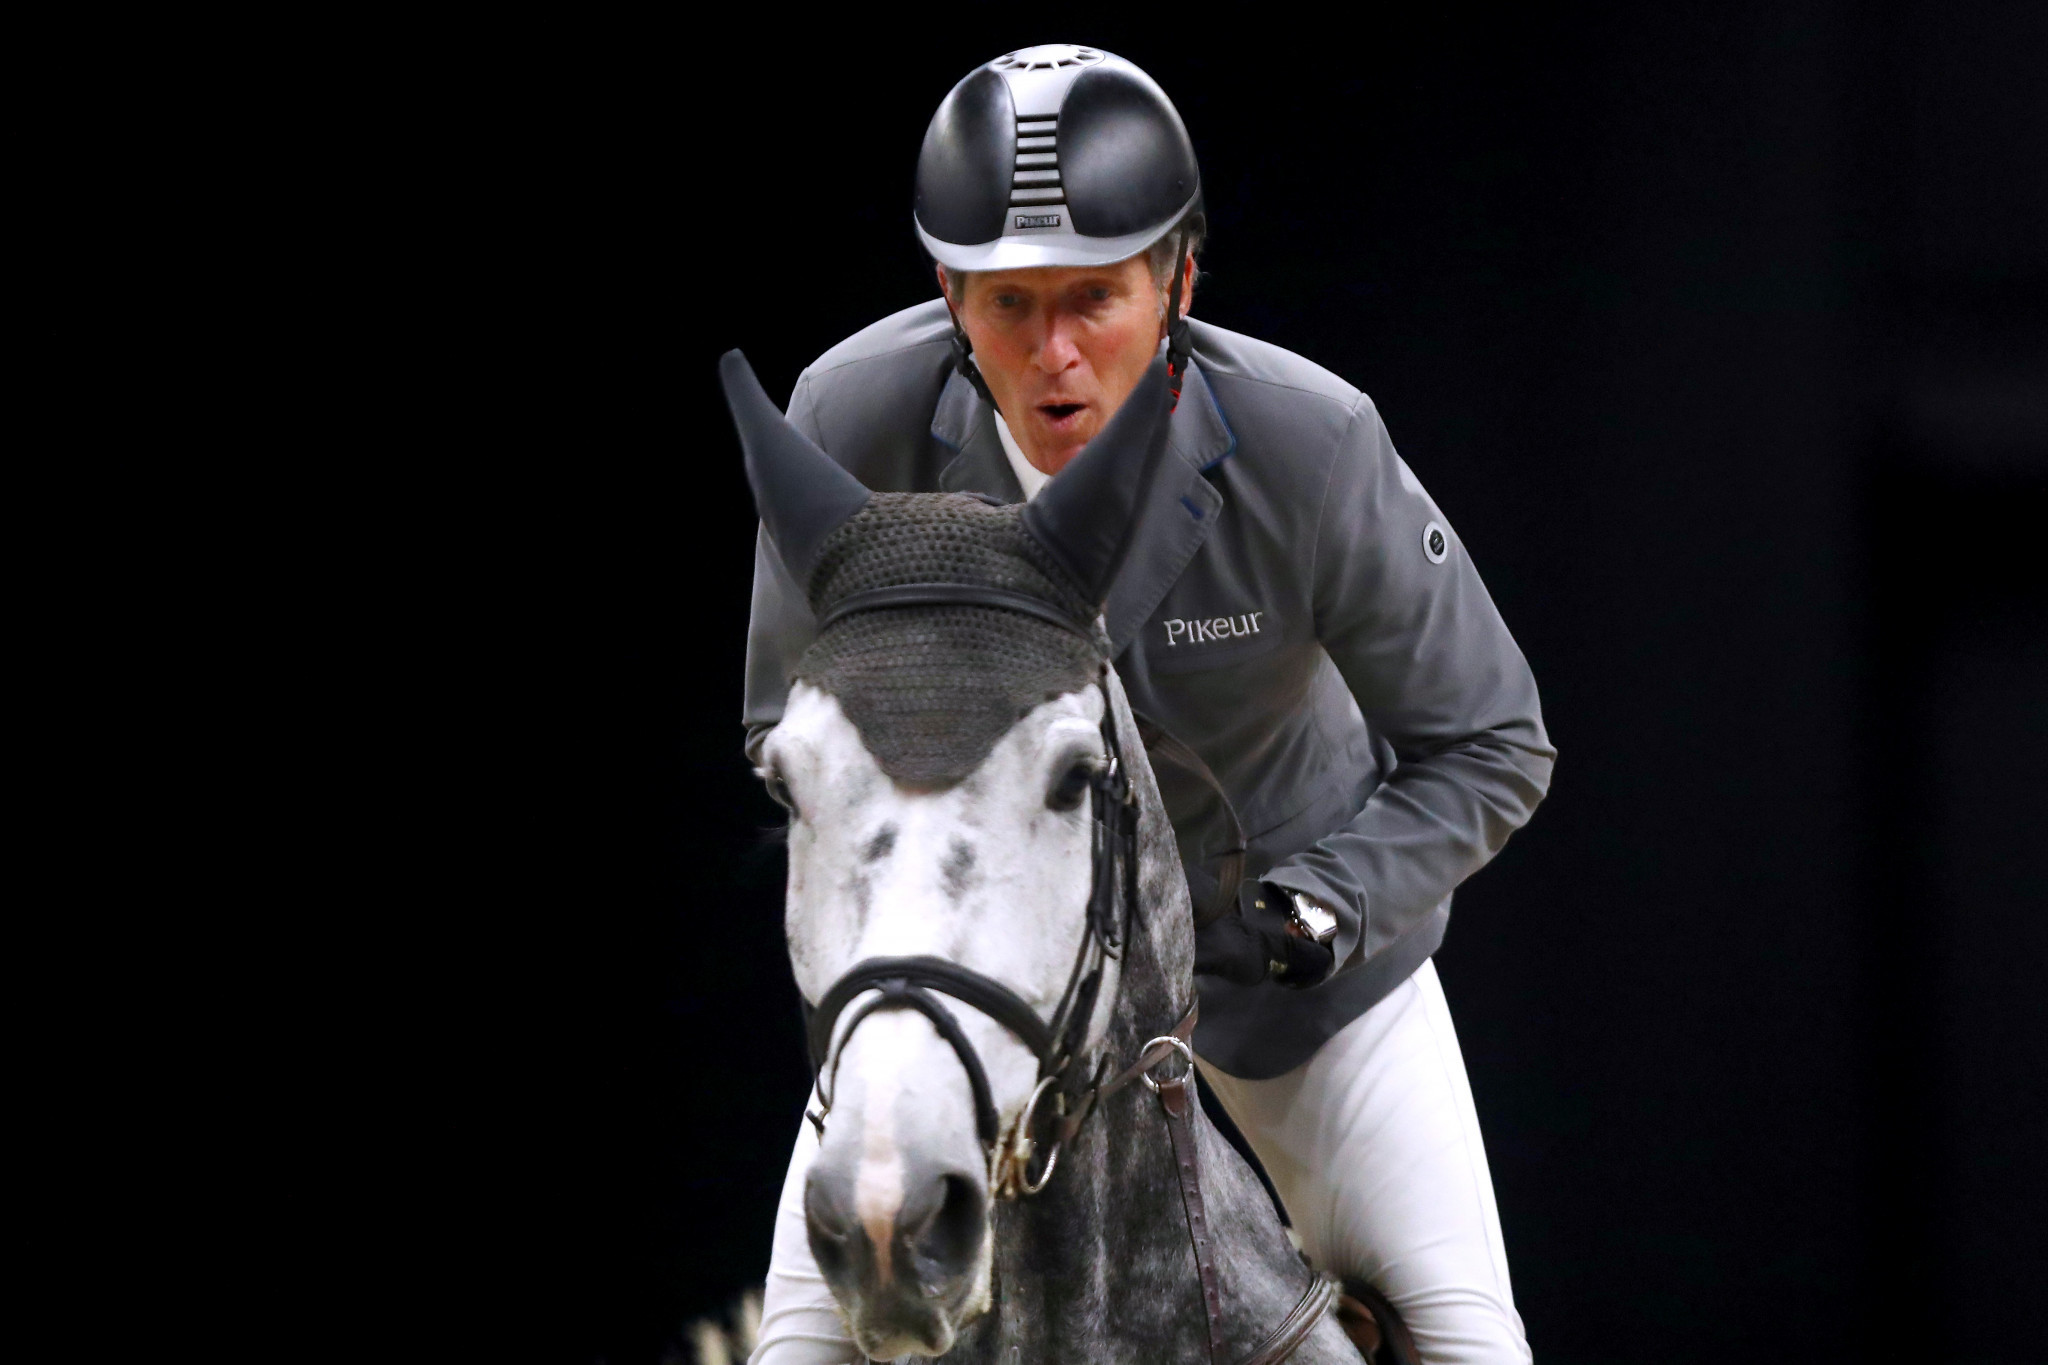 Ludger Beerbaum is facing a criminal investigation into allegations of using illegal training methods ©Getty Images